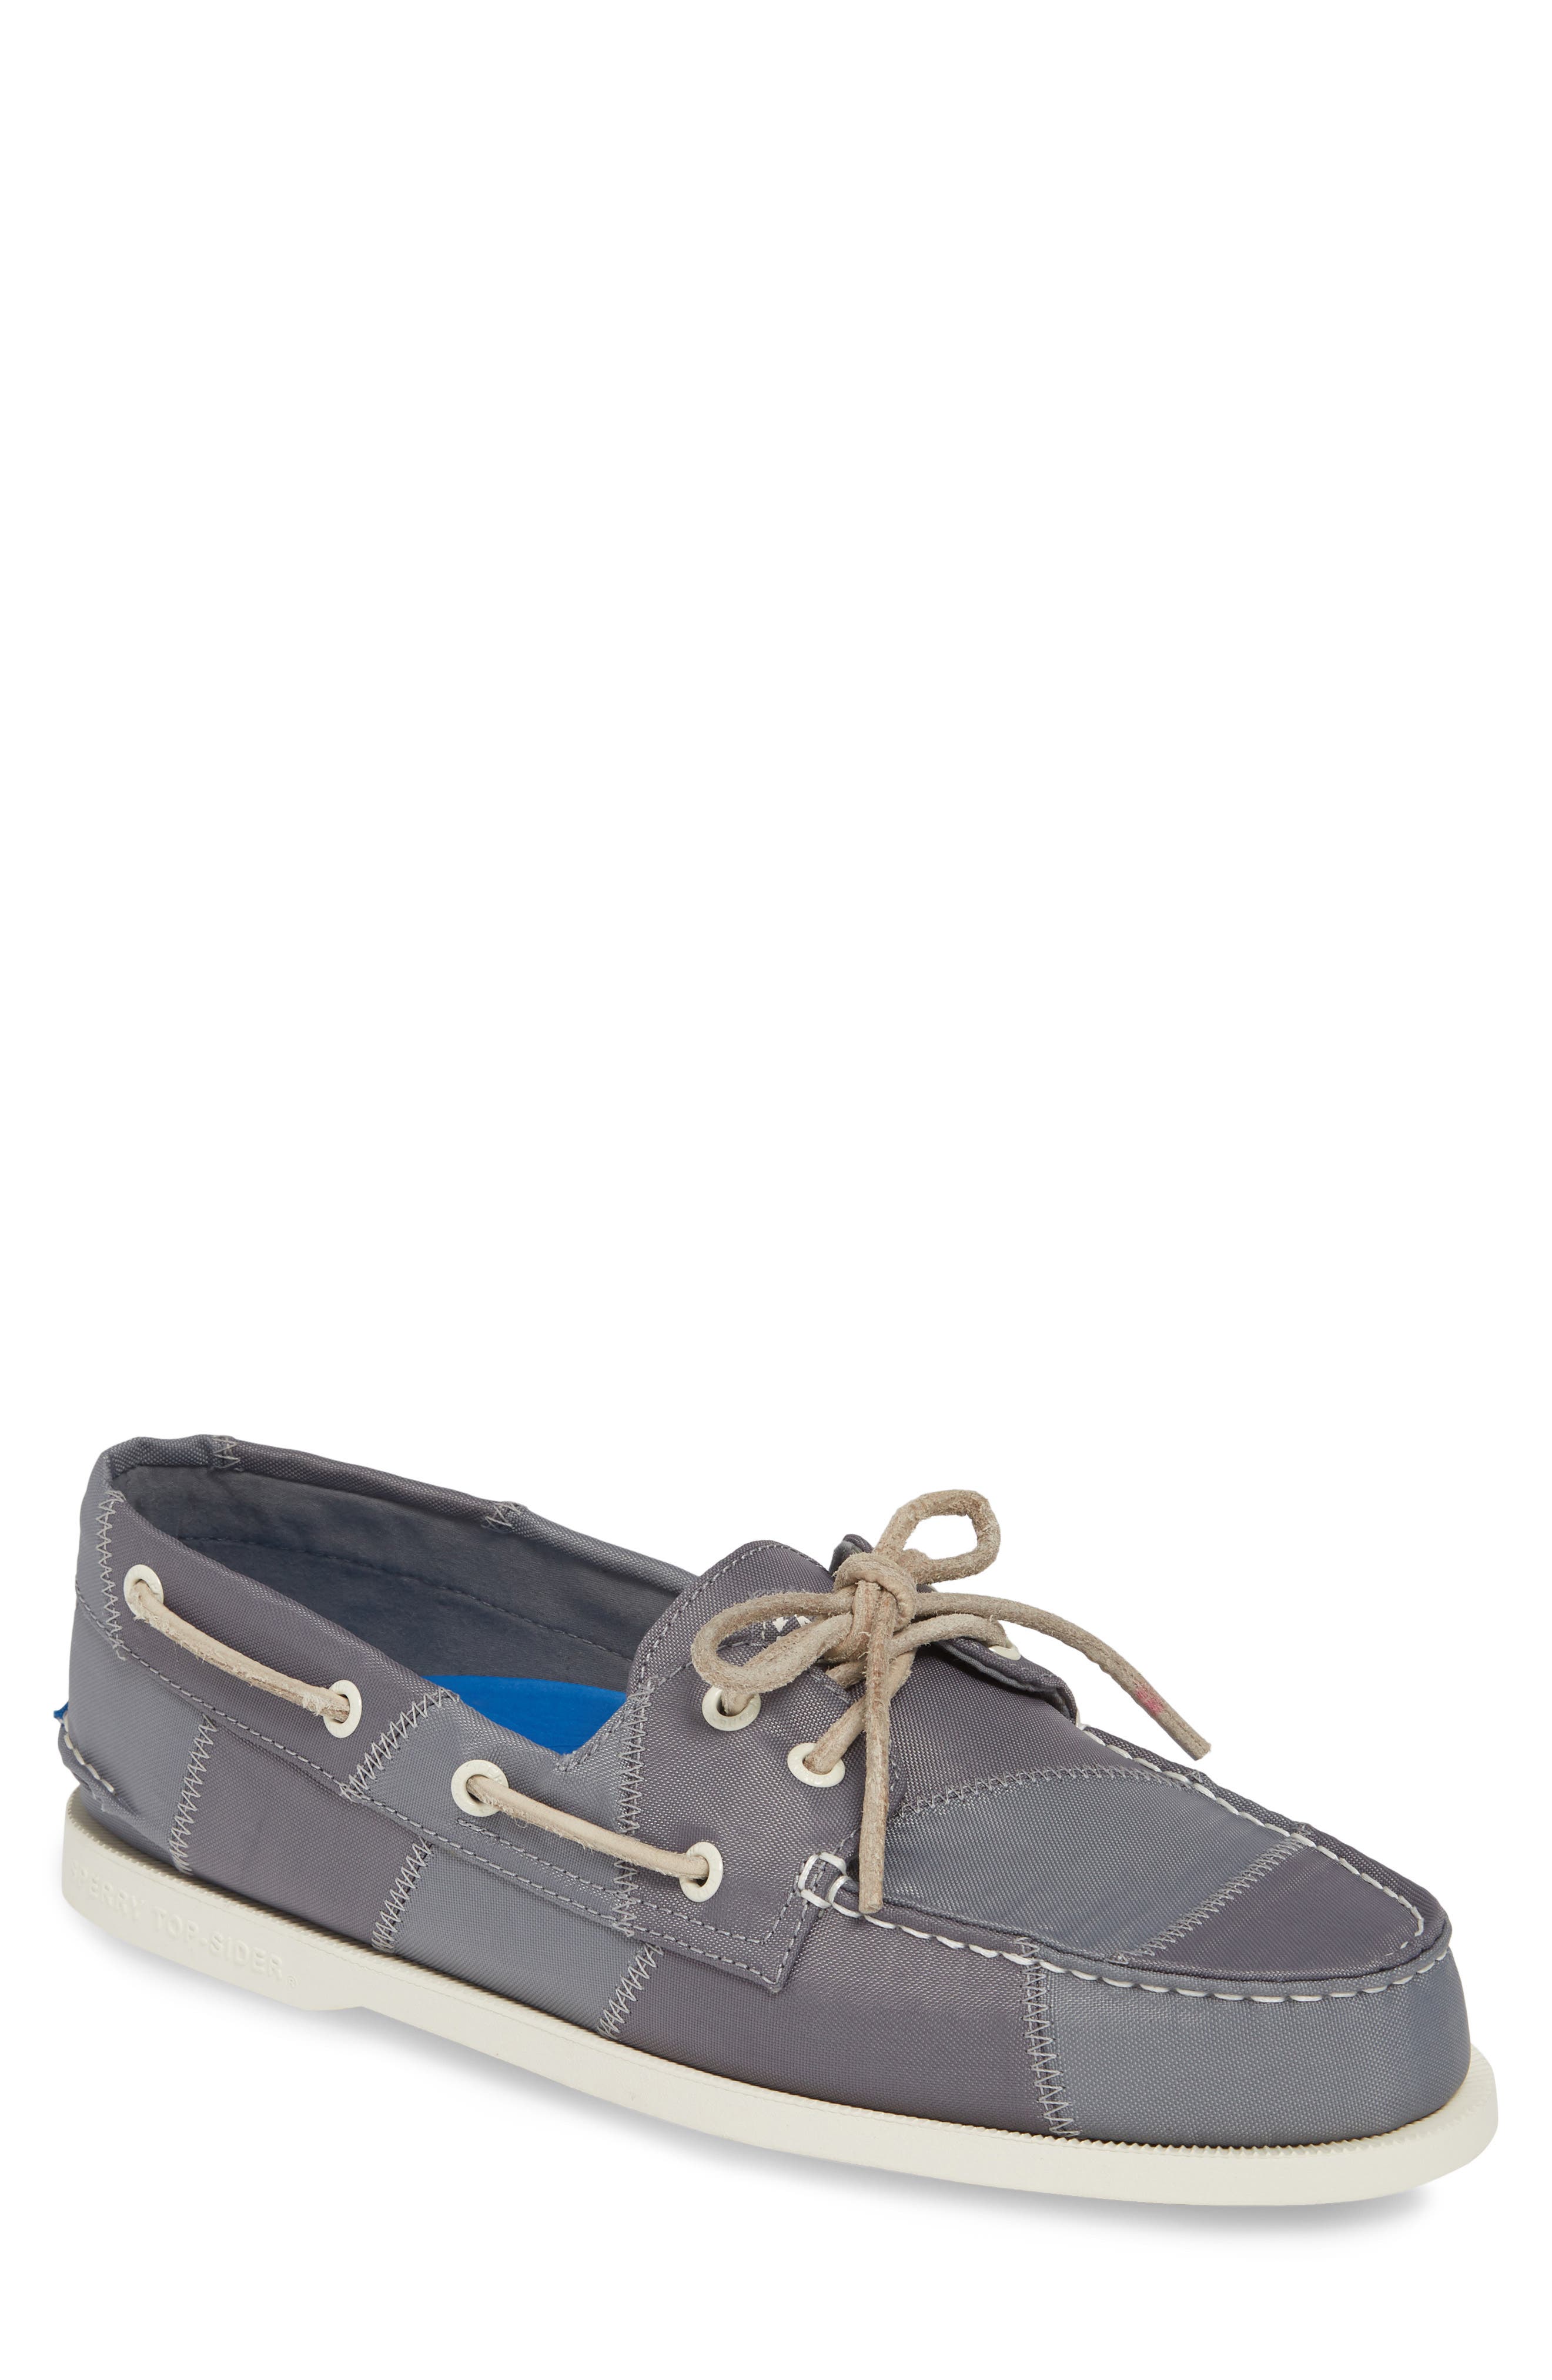 sperry plastic shoes